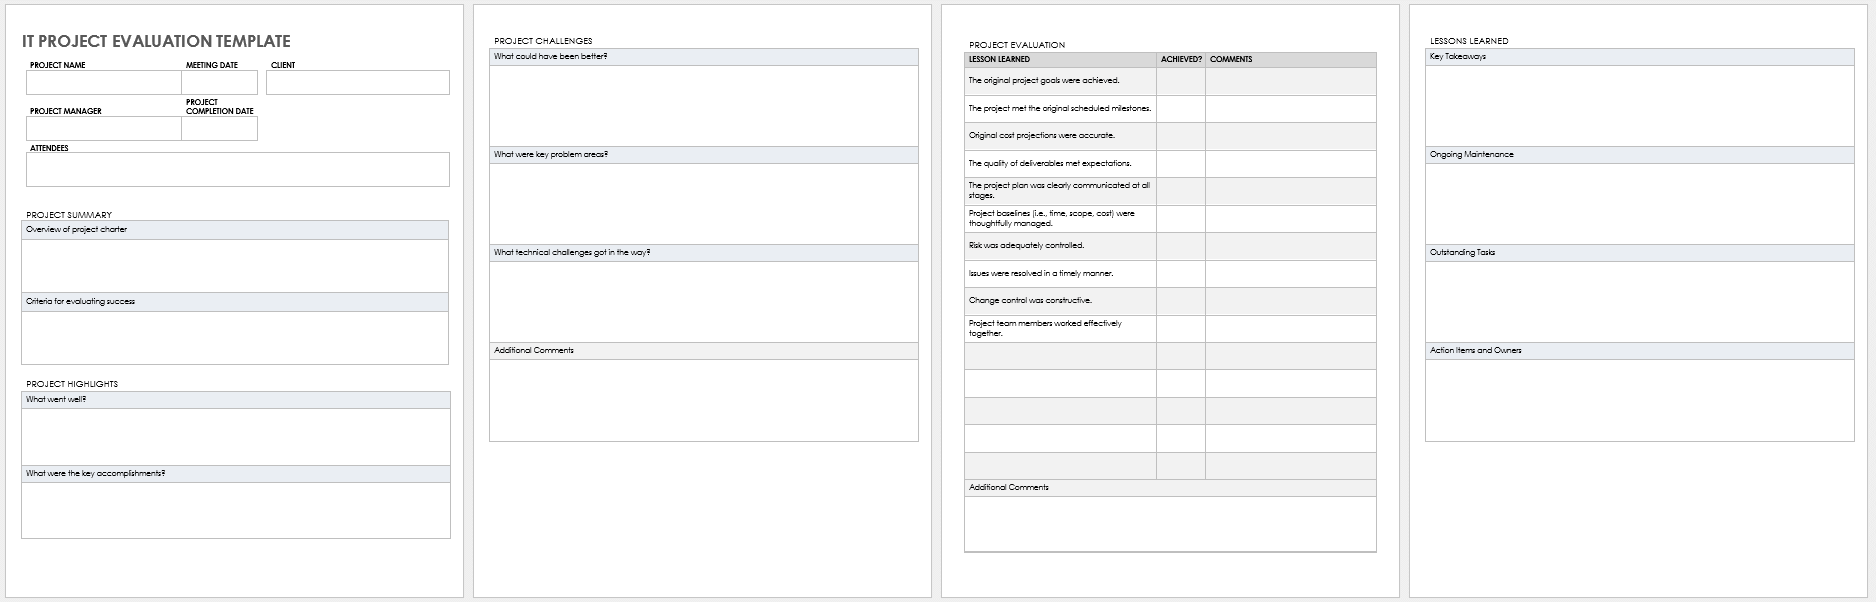 IT Project Evaluation Template